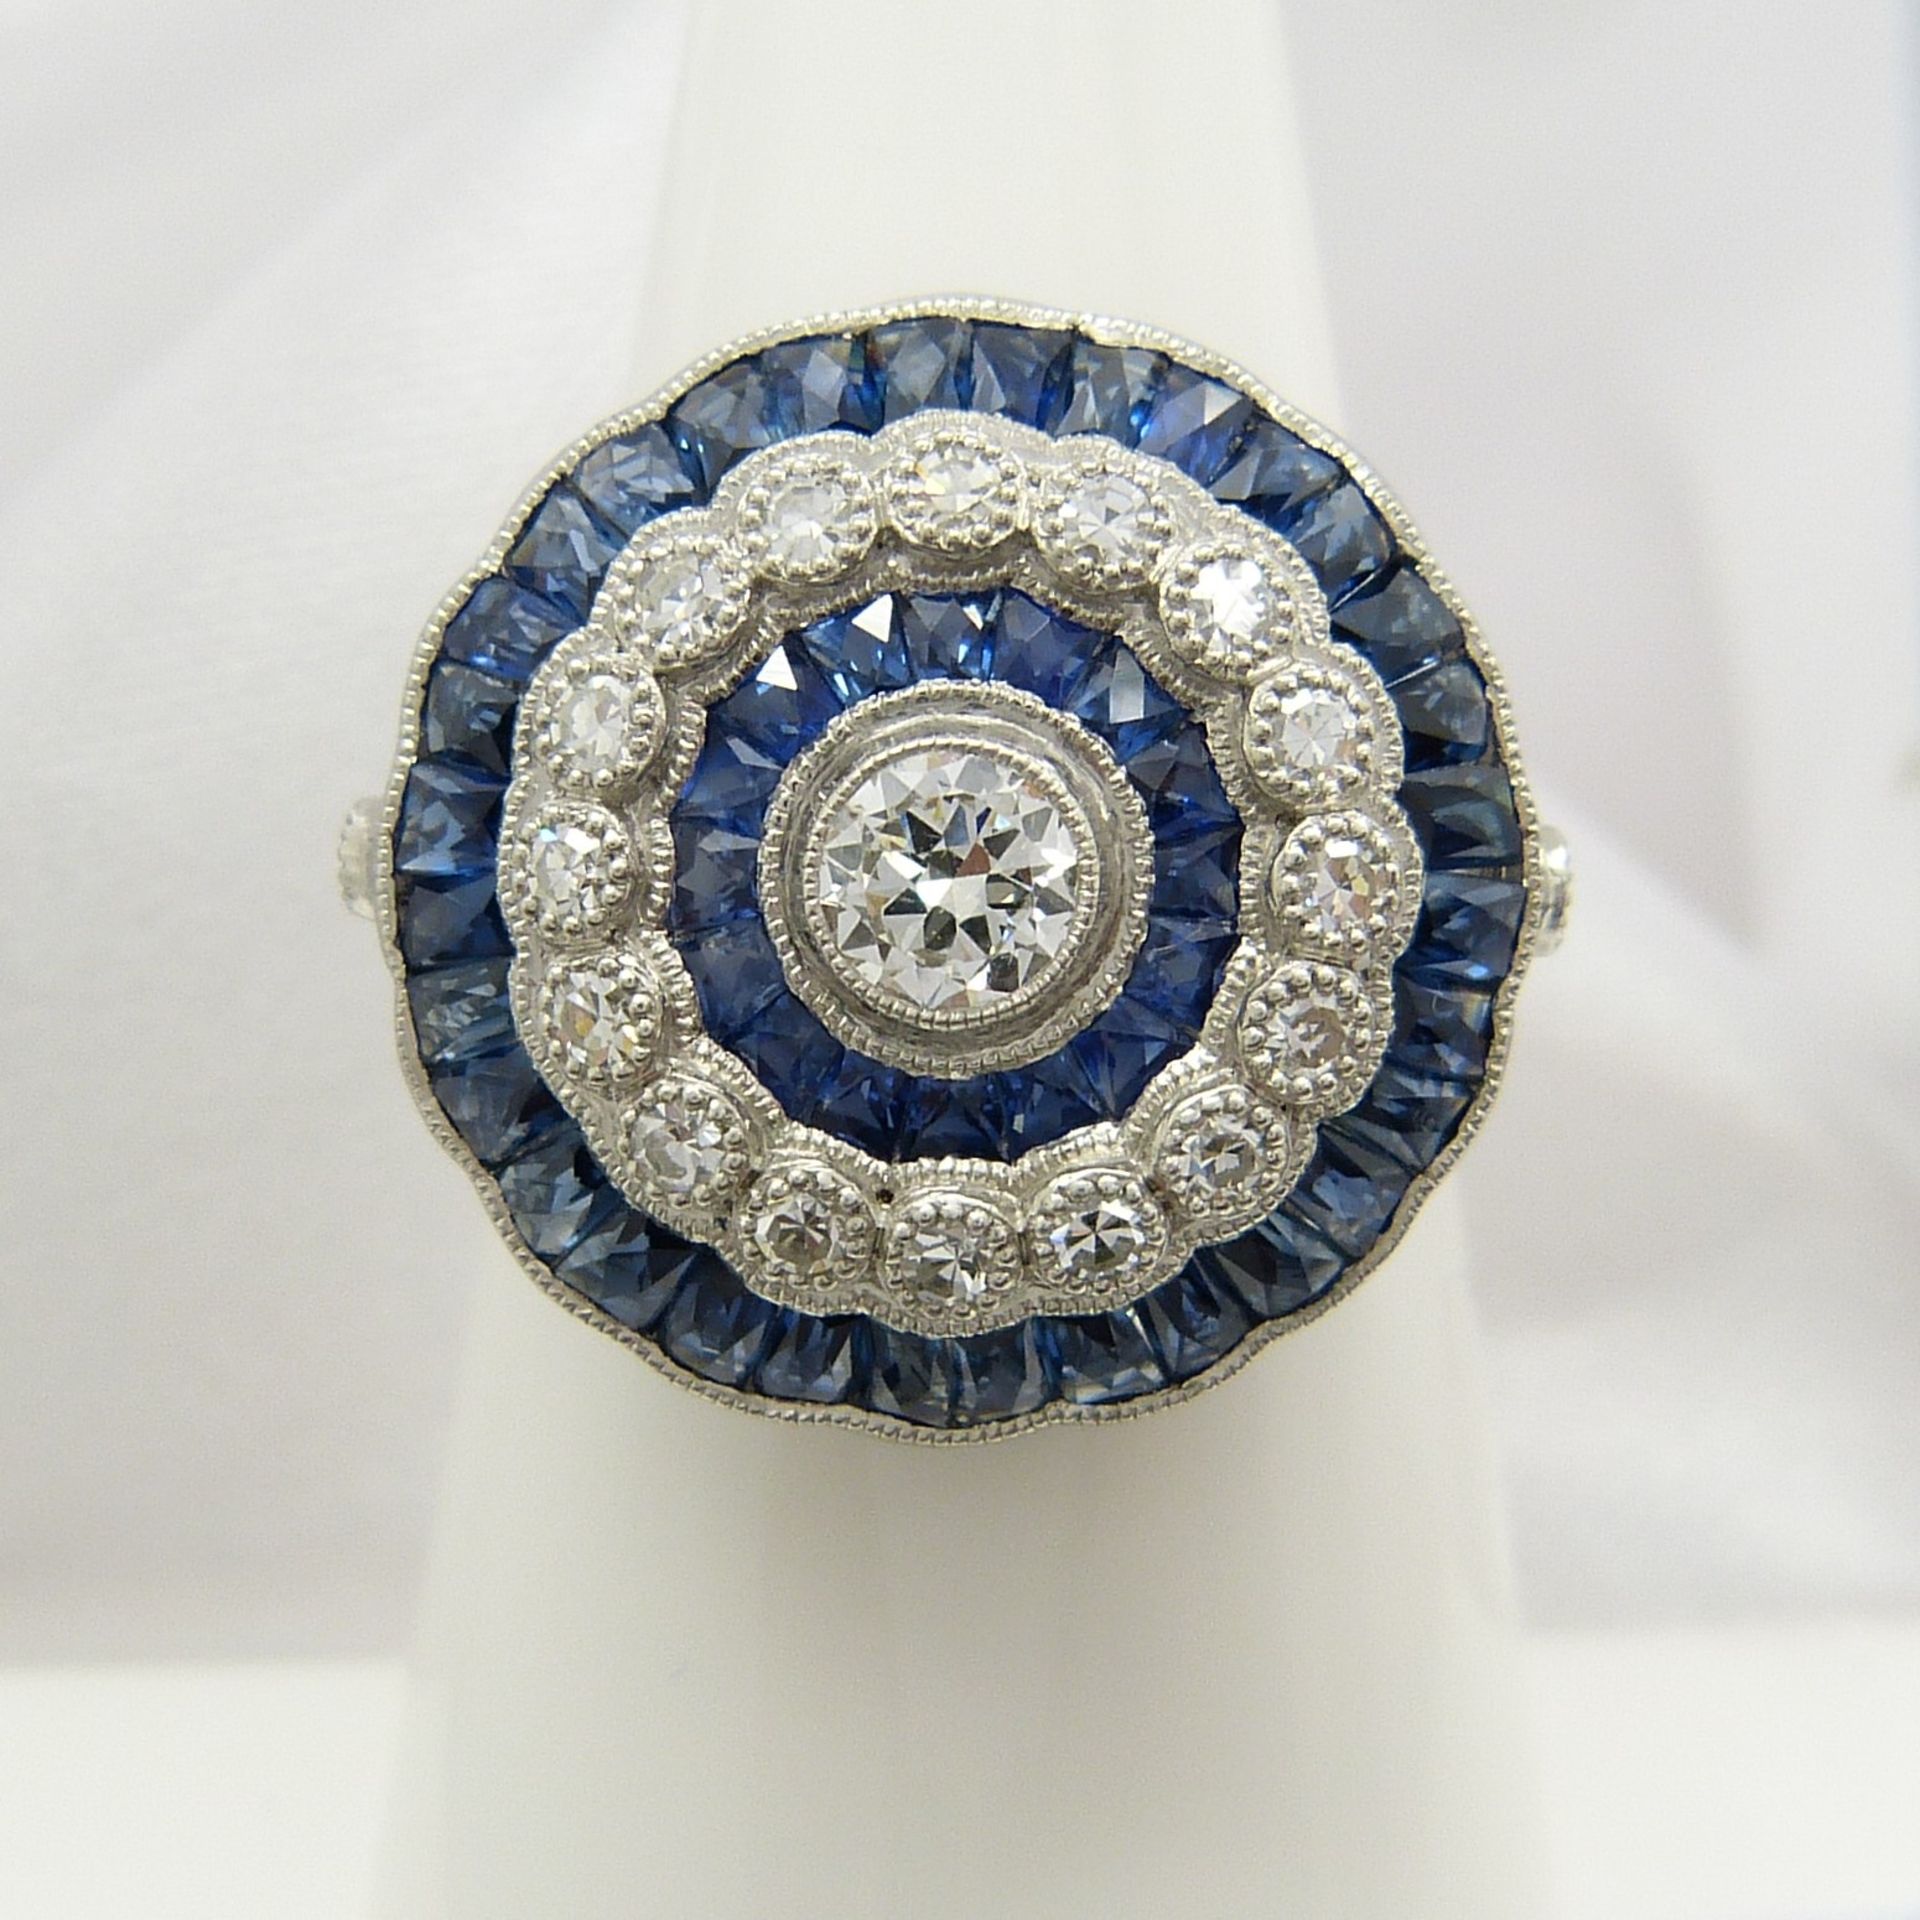 A large platinum floral-style diamond and sapphire cocktail ring